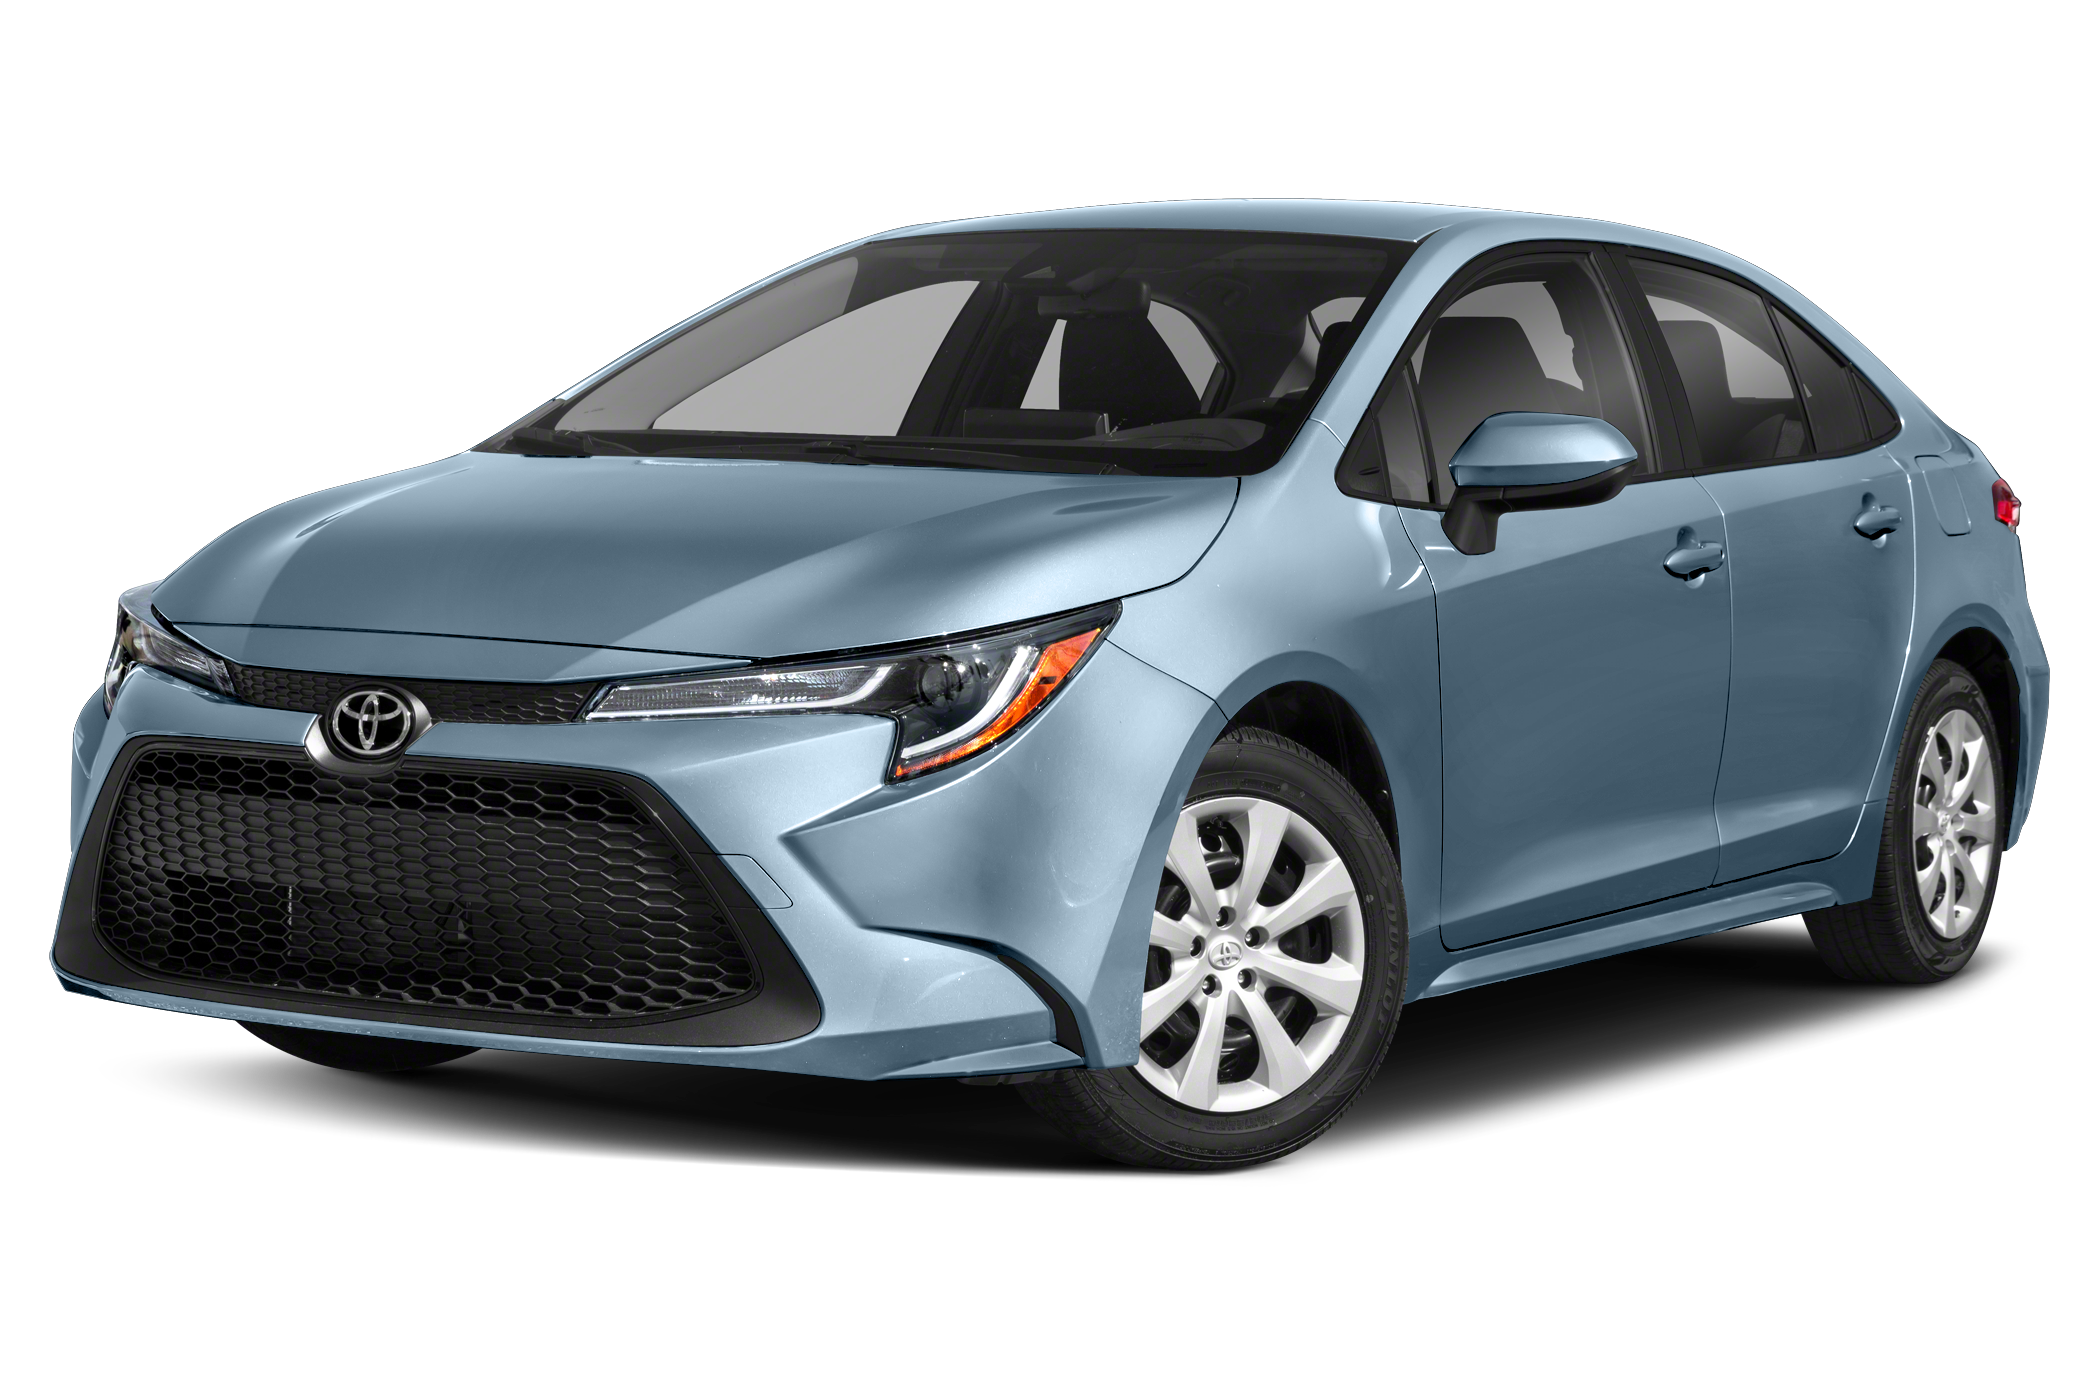 Toyota Corolla Models, Generations & Redesigns